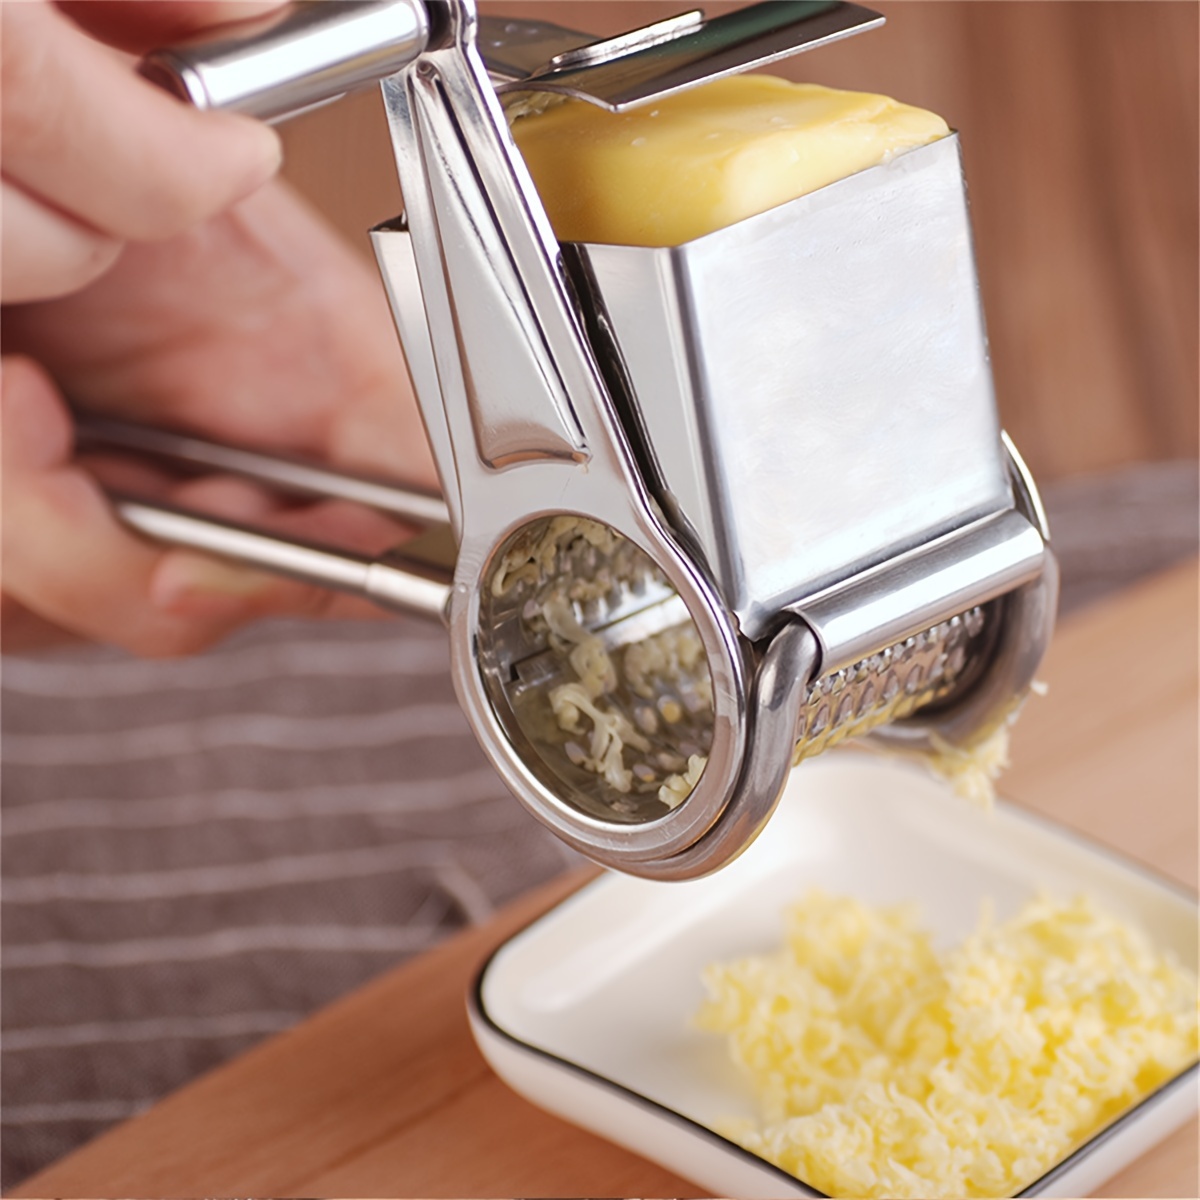 

1pc, Cheese Grater, Multifunctional Stainless Steel Cheese Grater, Manual Rotary Cheese Grinder, Household Creative Cheese Grater, Food Grater, Kitchen Stuff, Kitchen Gadgets